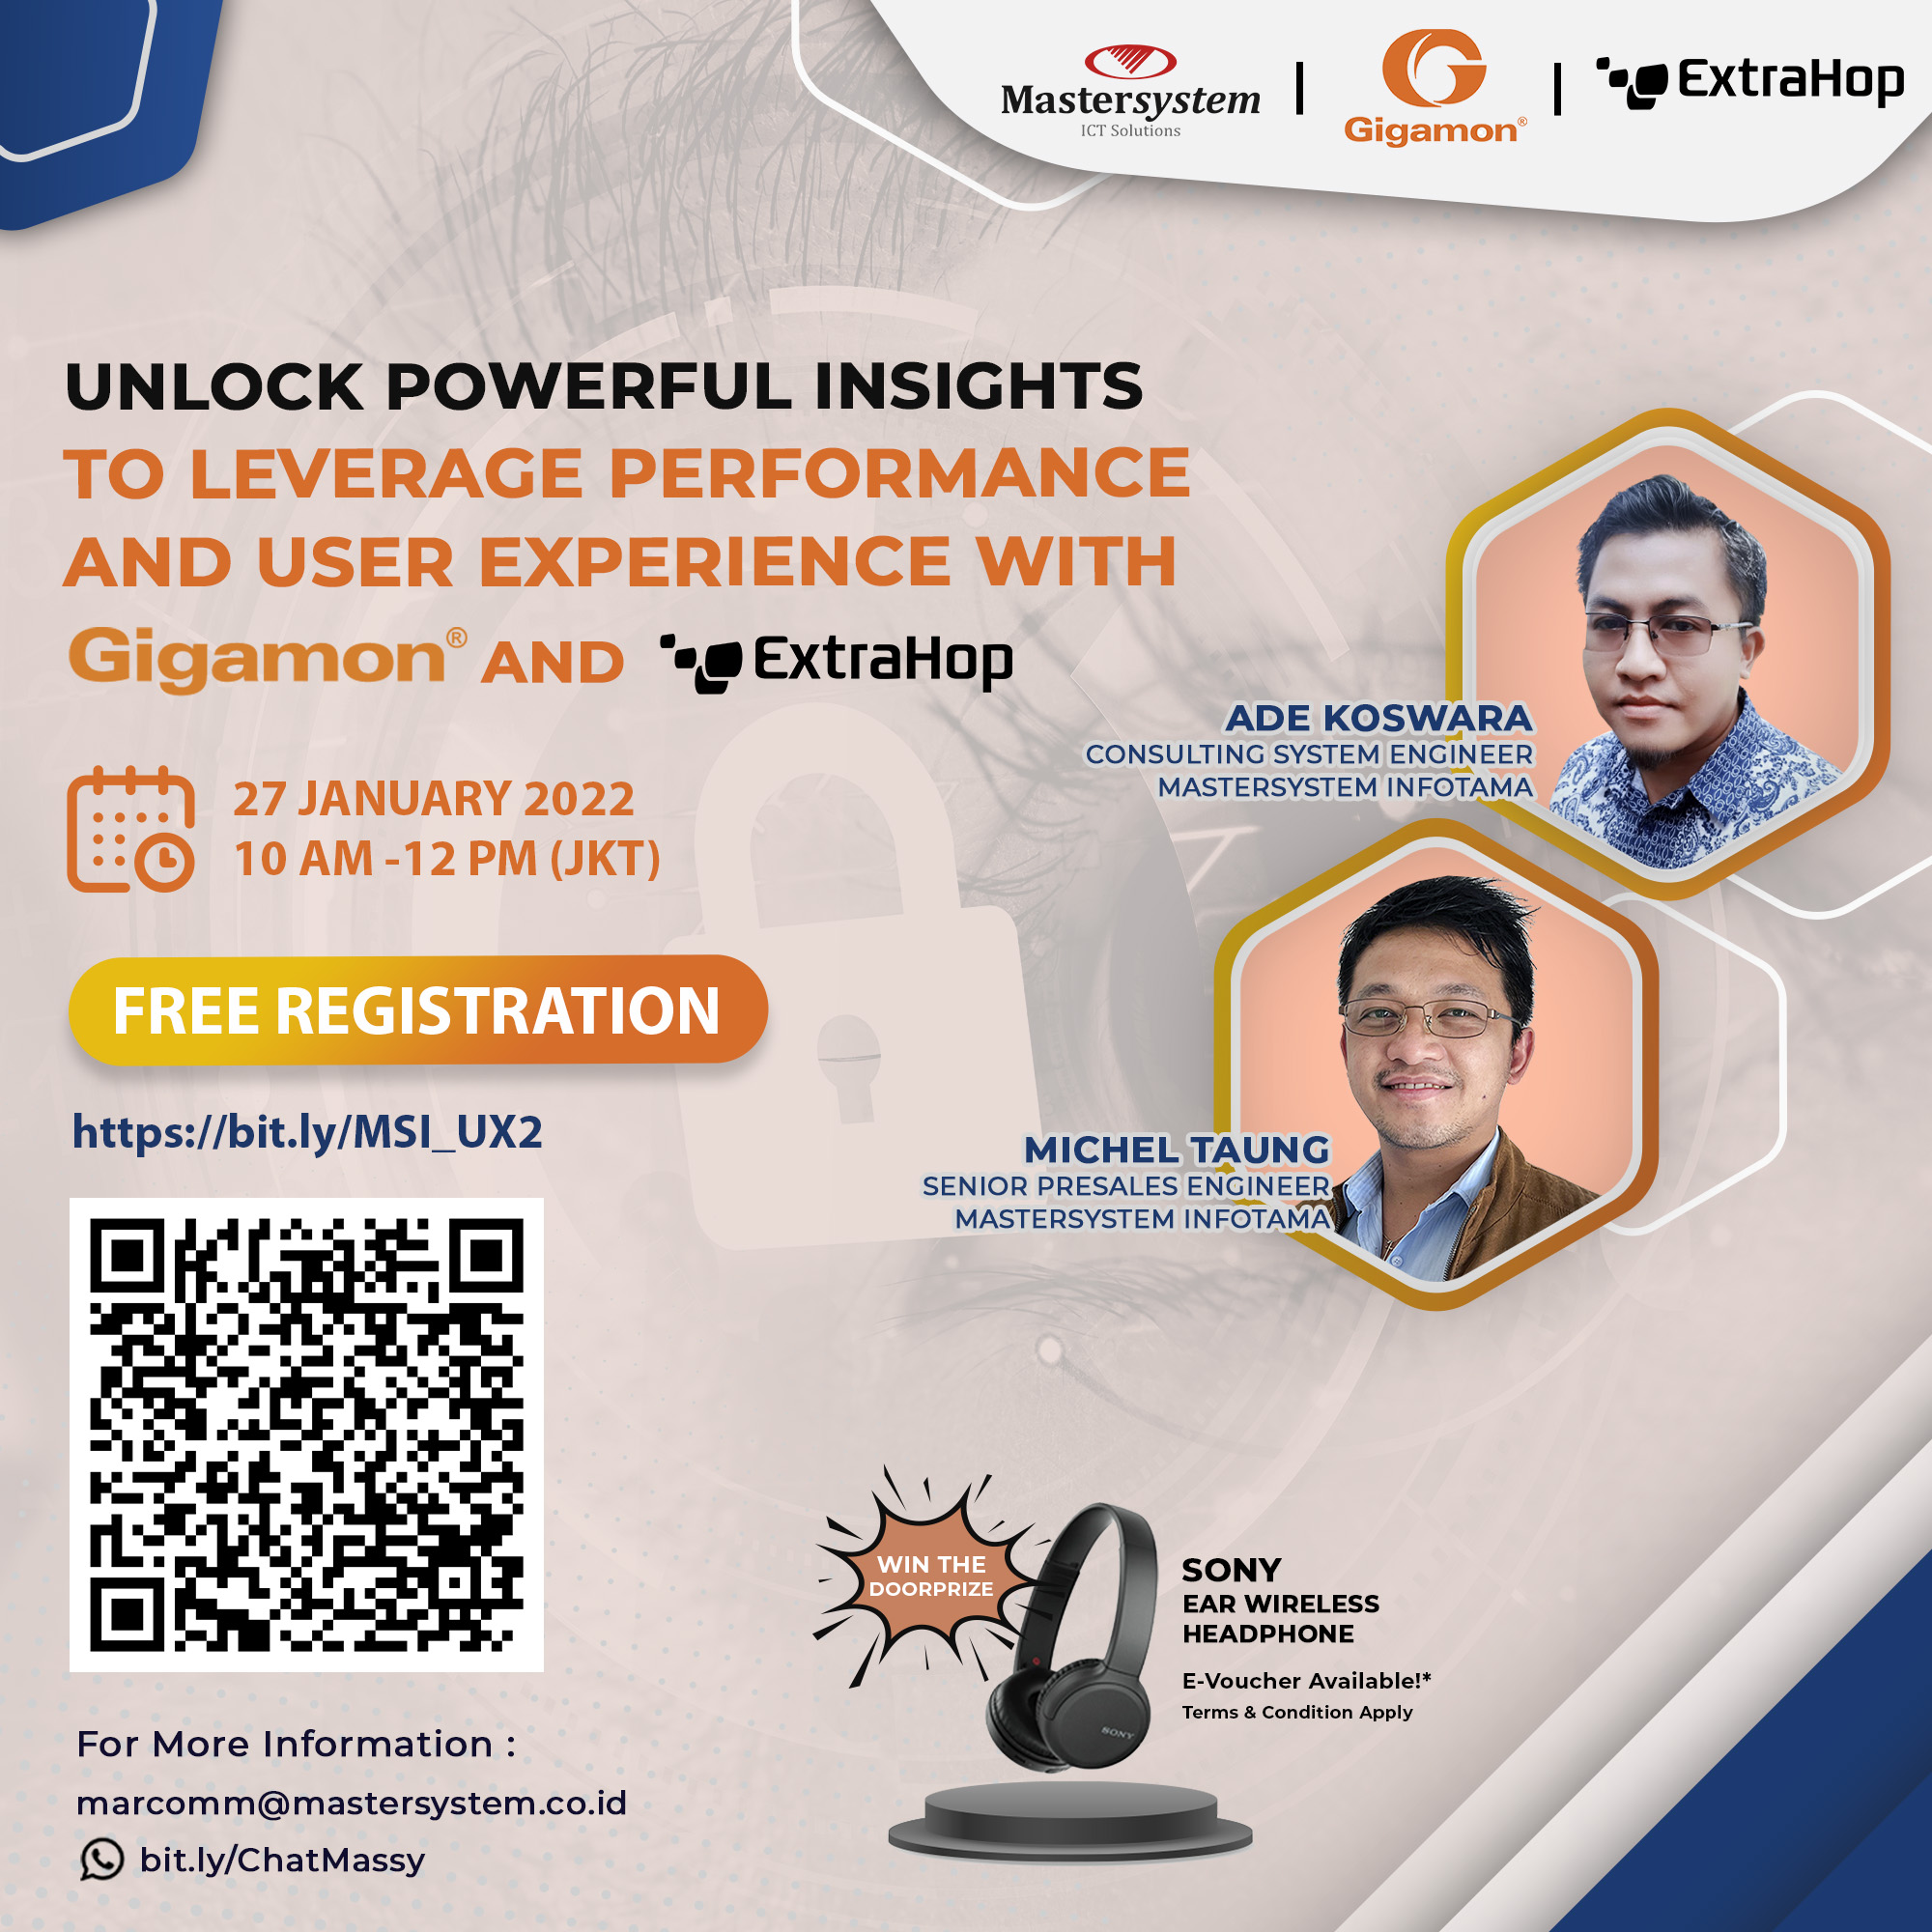 Unlock Powerful Insights to Leverage Performance and User Experience with Gigamon & Extrahop